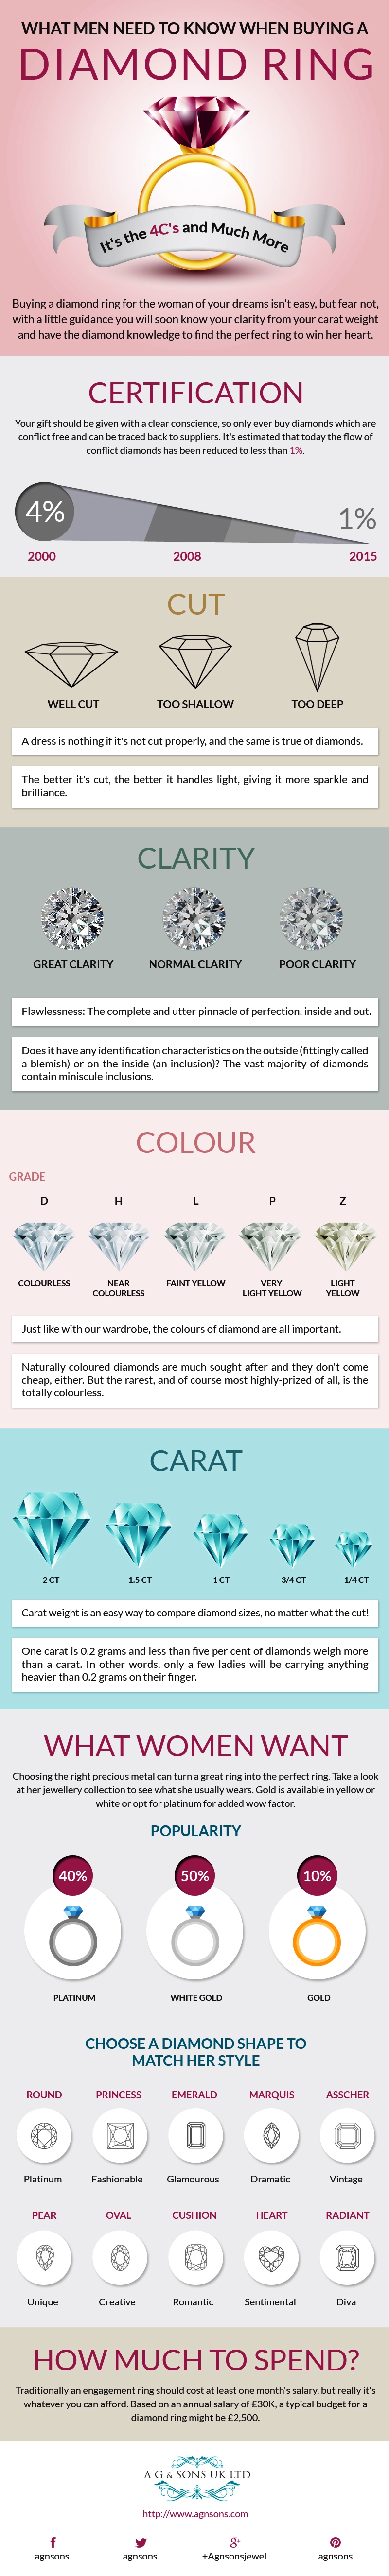 What men need to know when buying a diamond ring